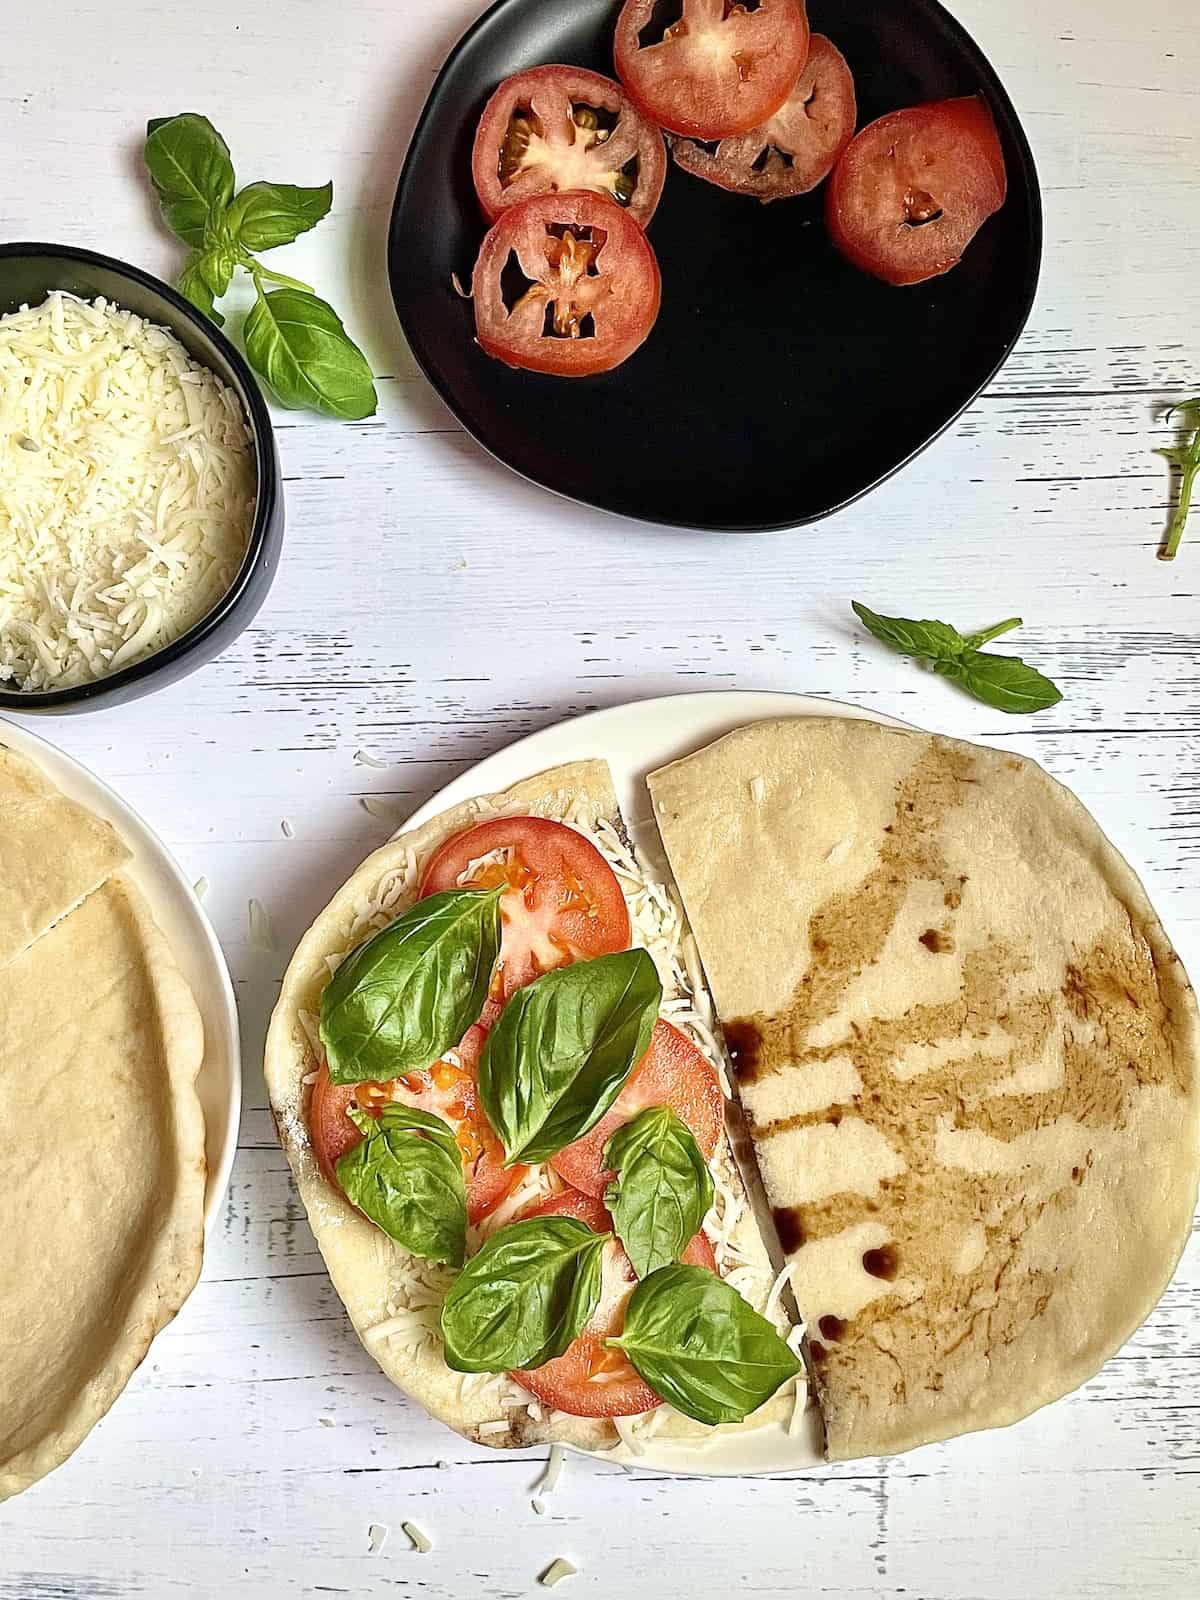 naan bread covered with cheese, tomatoes, and basil